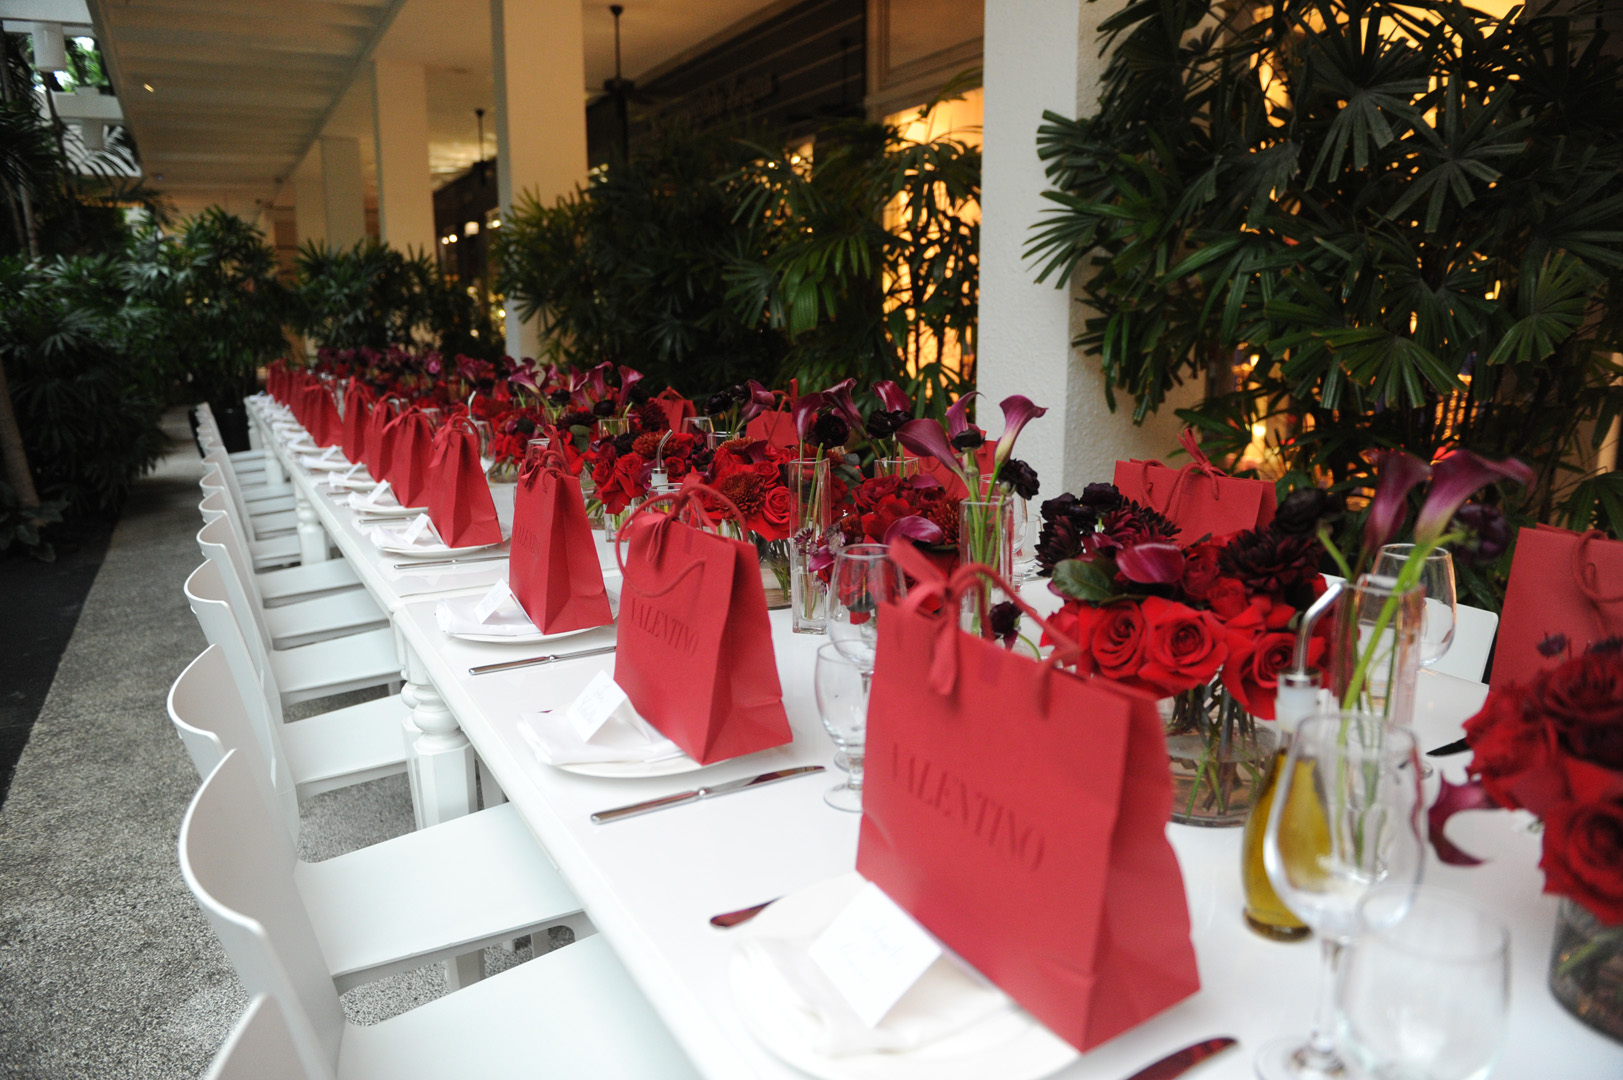 A white table set up with red roses and red valentine bags